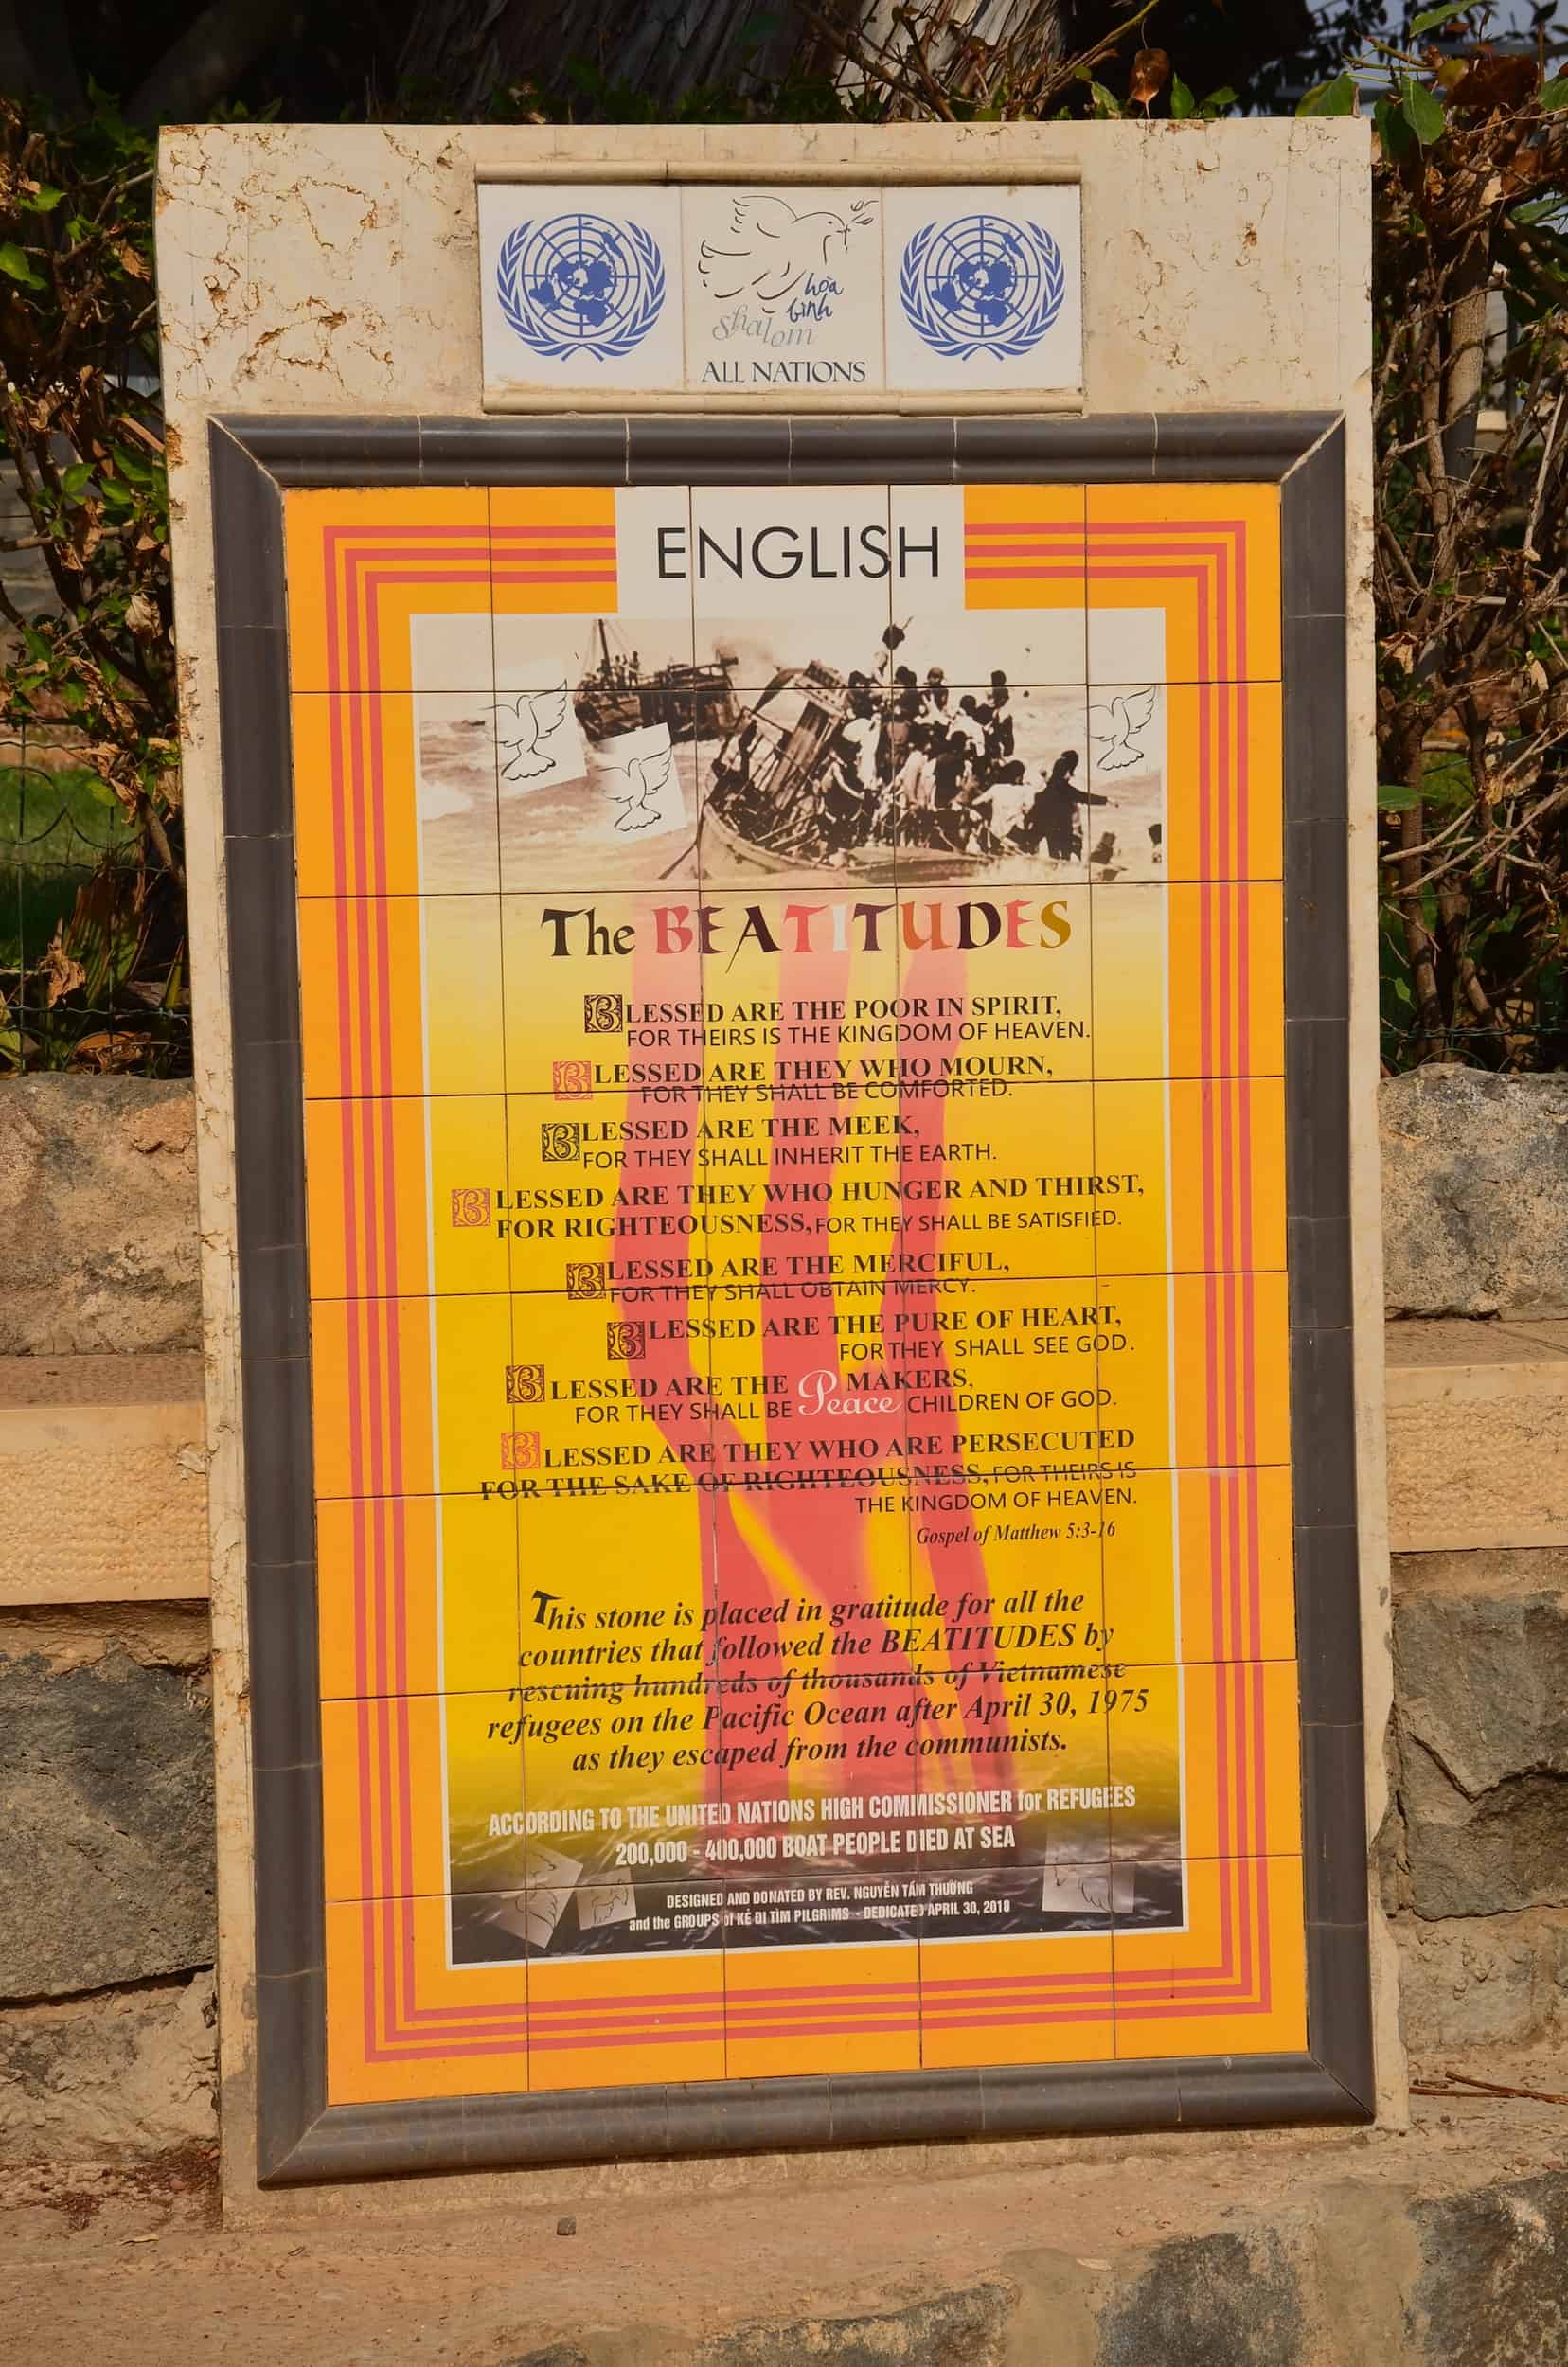 Beatitudes written in English on the Mount of Beatitudes in Israel